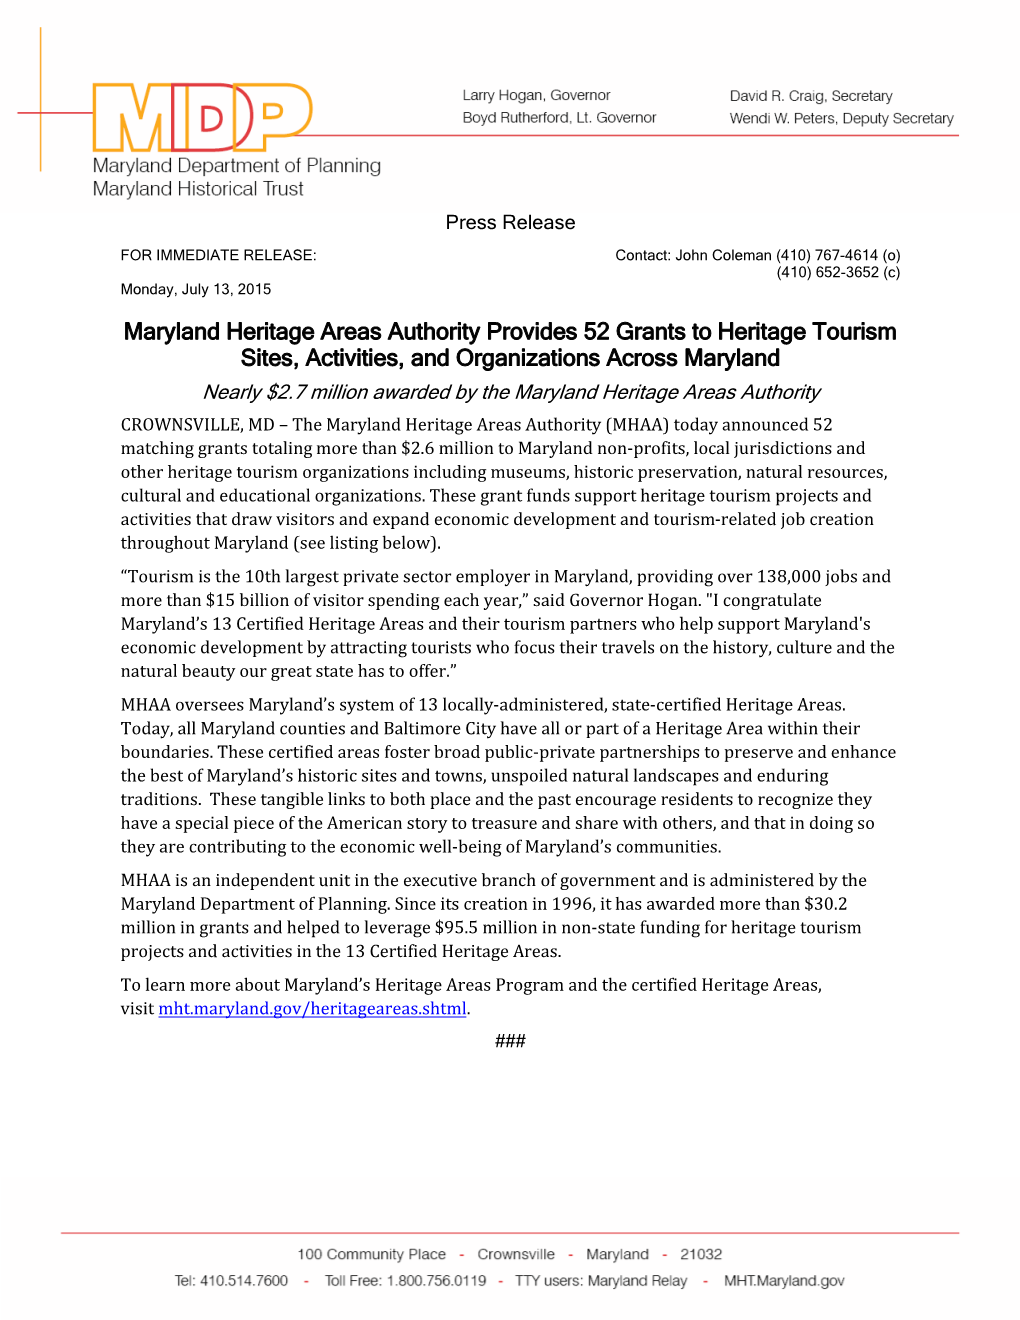 Maryland Heritage Areas Authority Provides 52 Grants to Heritage Tourism Sites, Activities